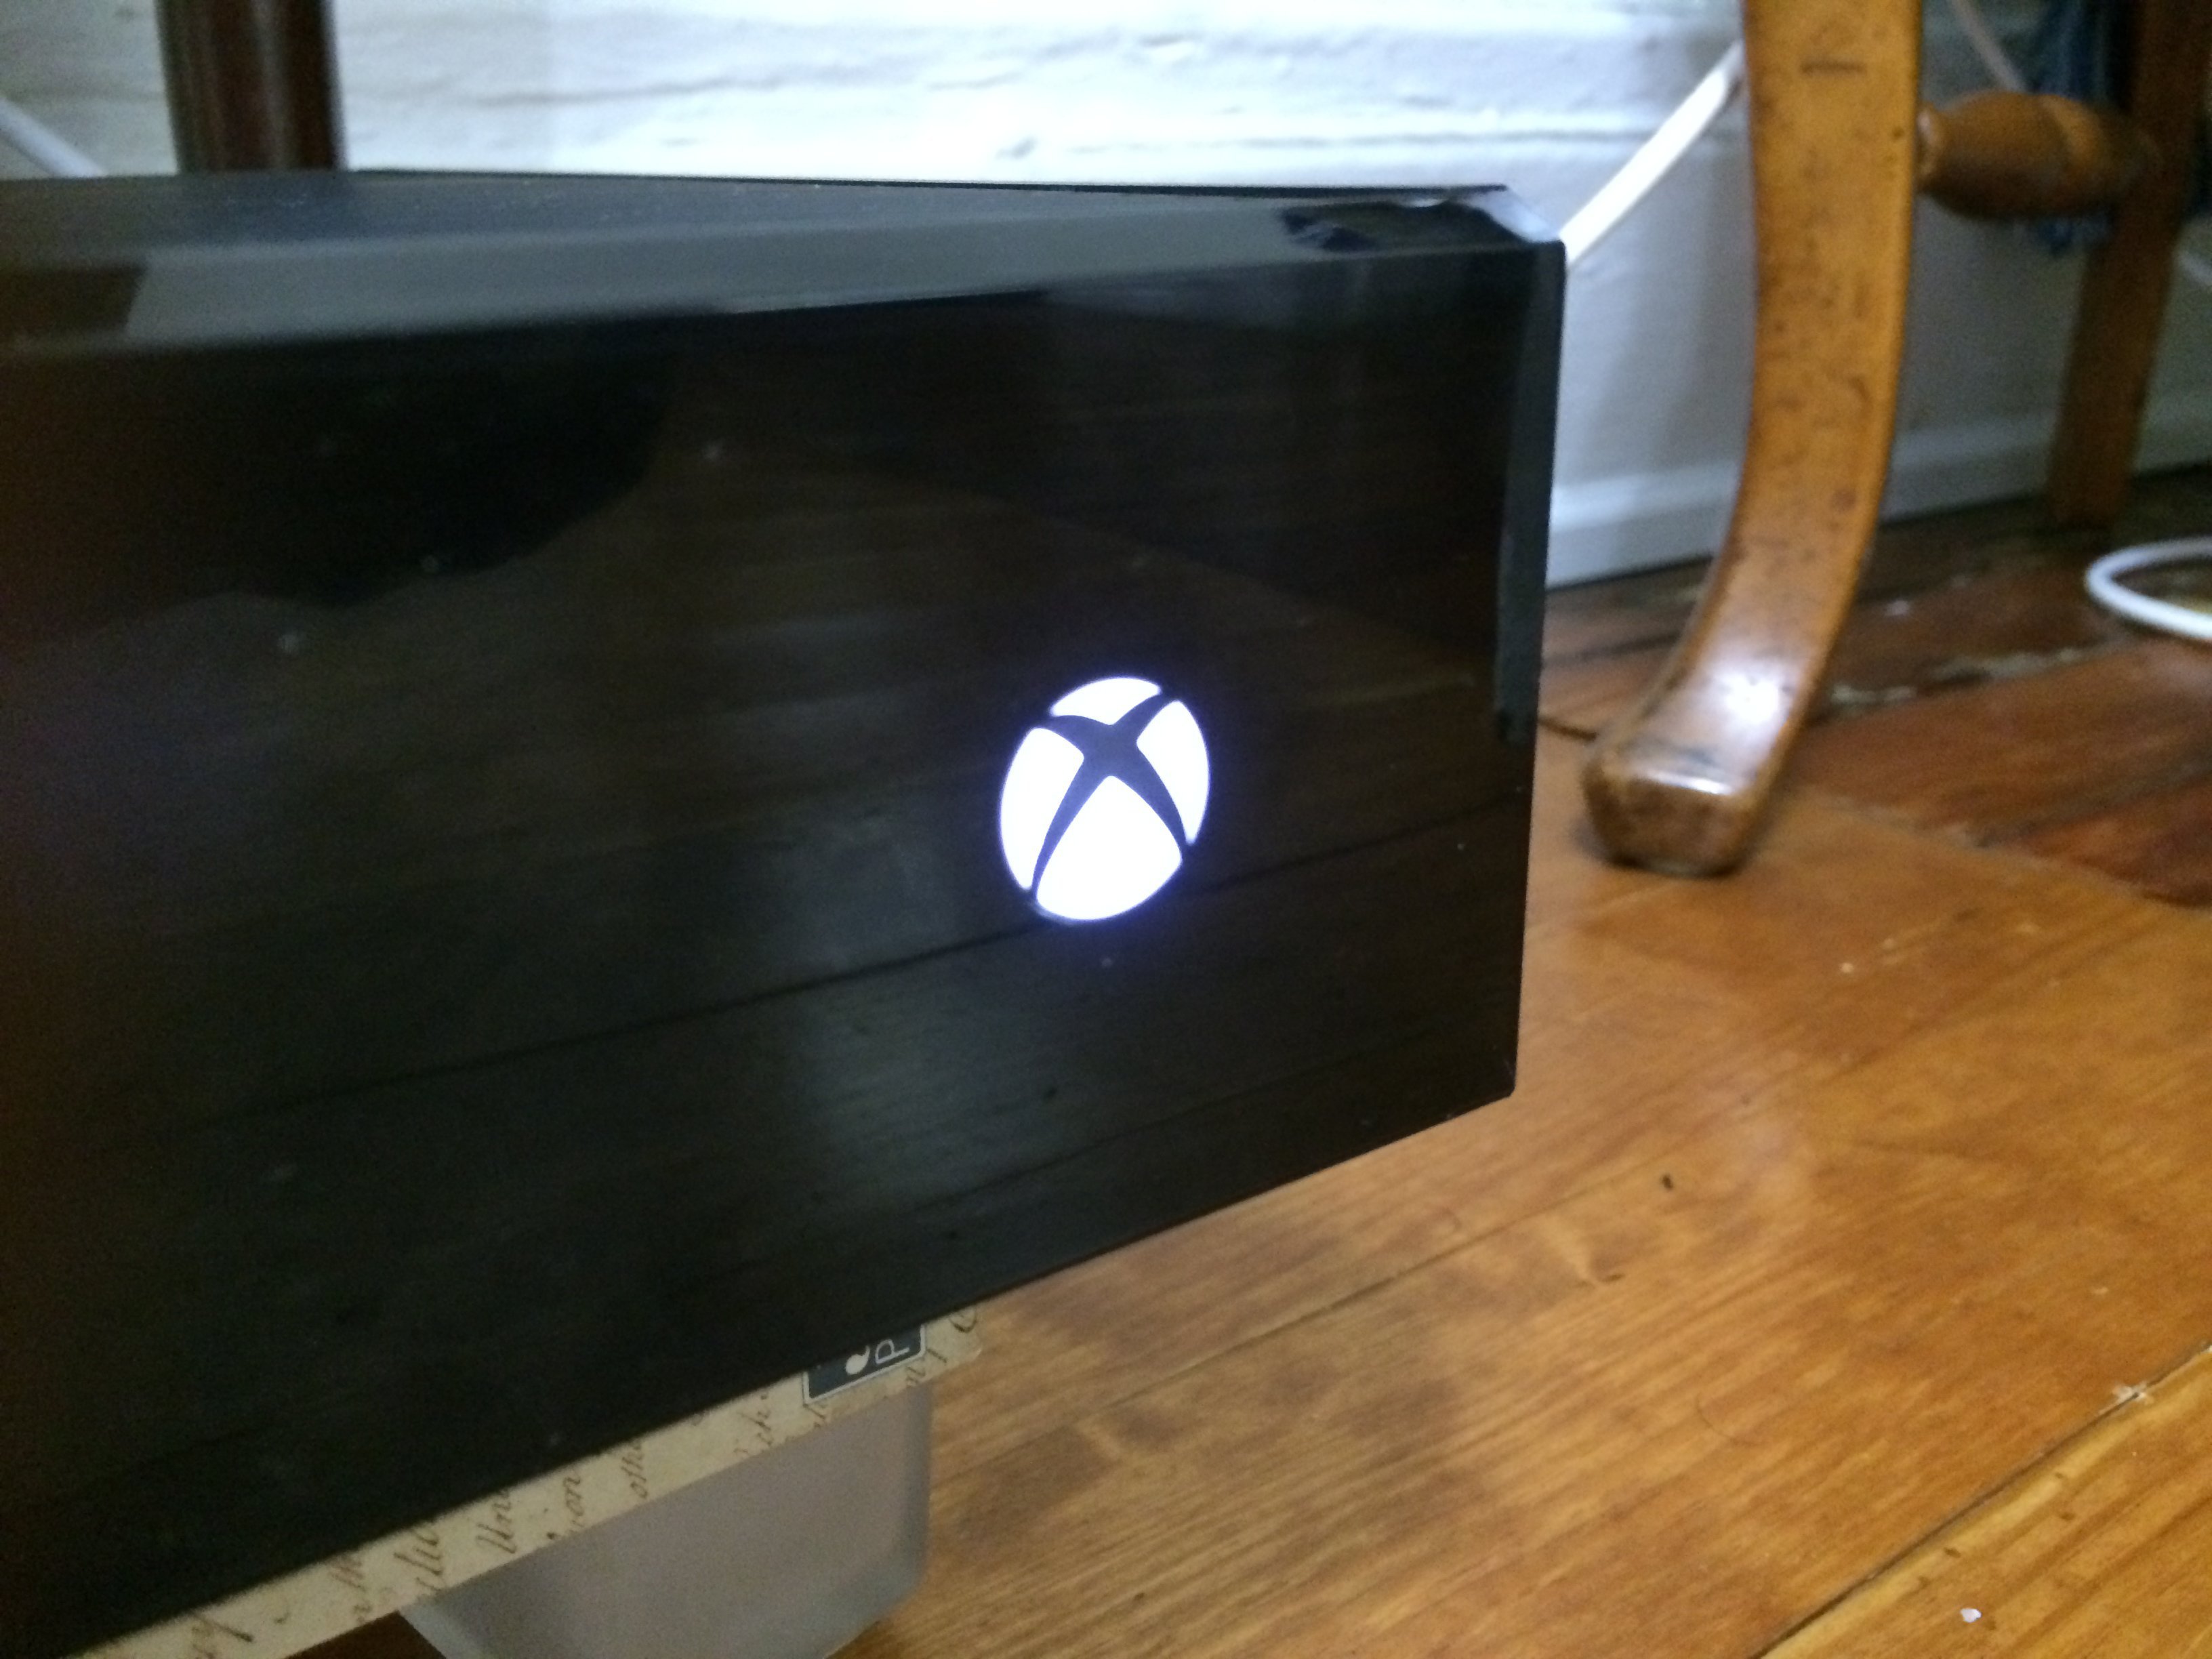 Reboot the Xbox One.